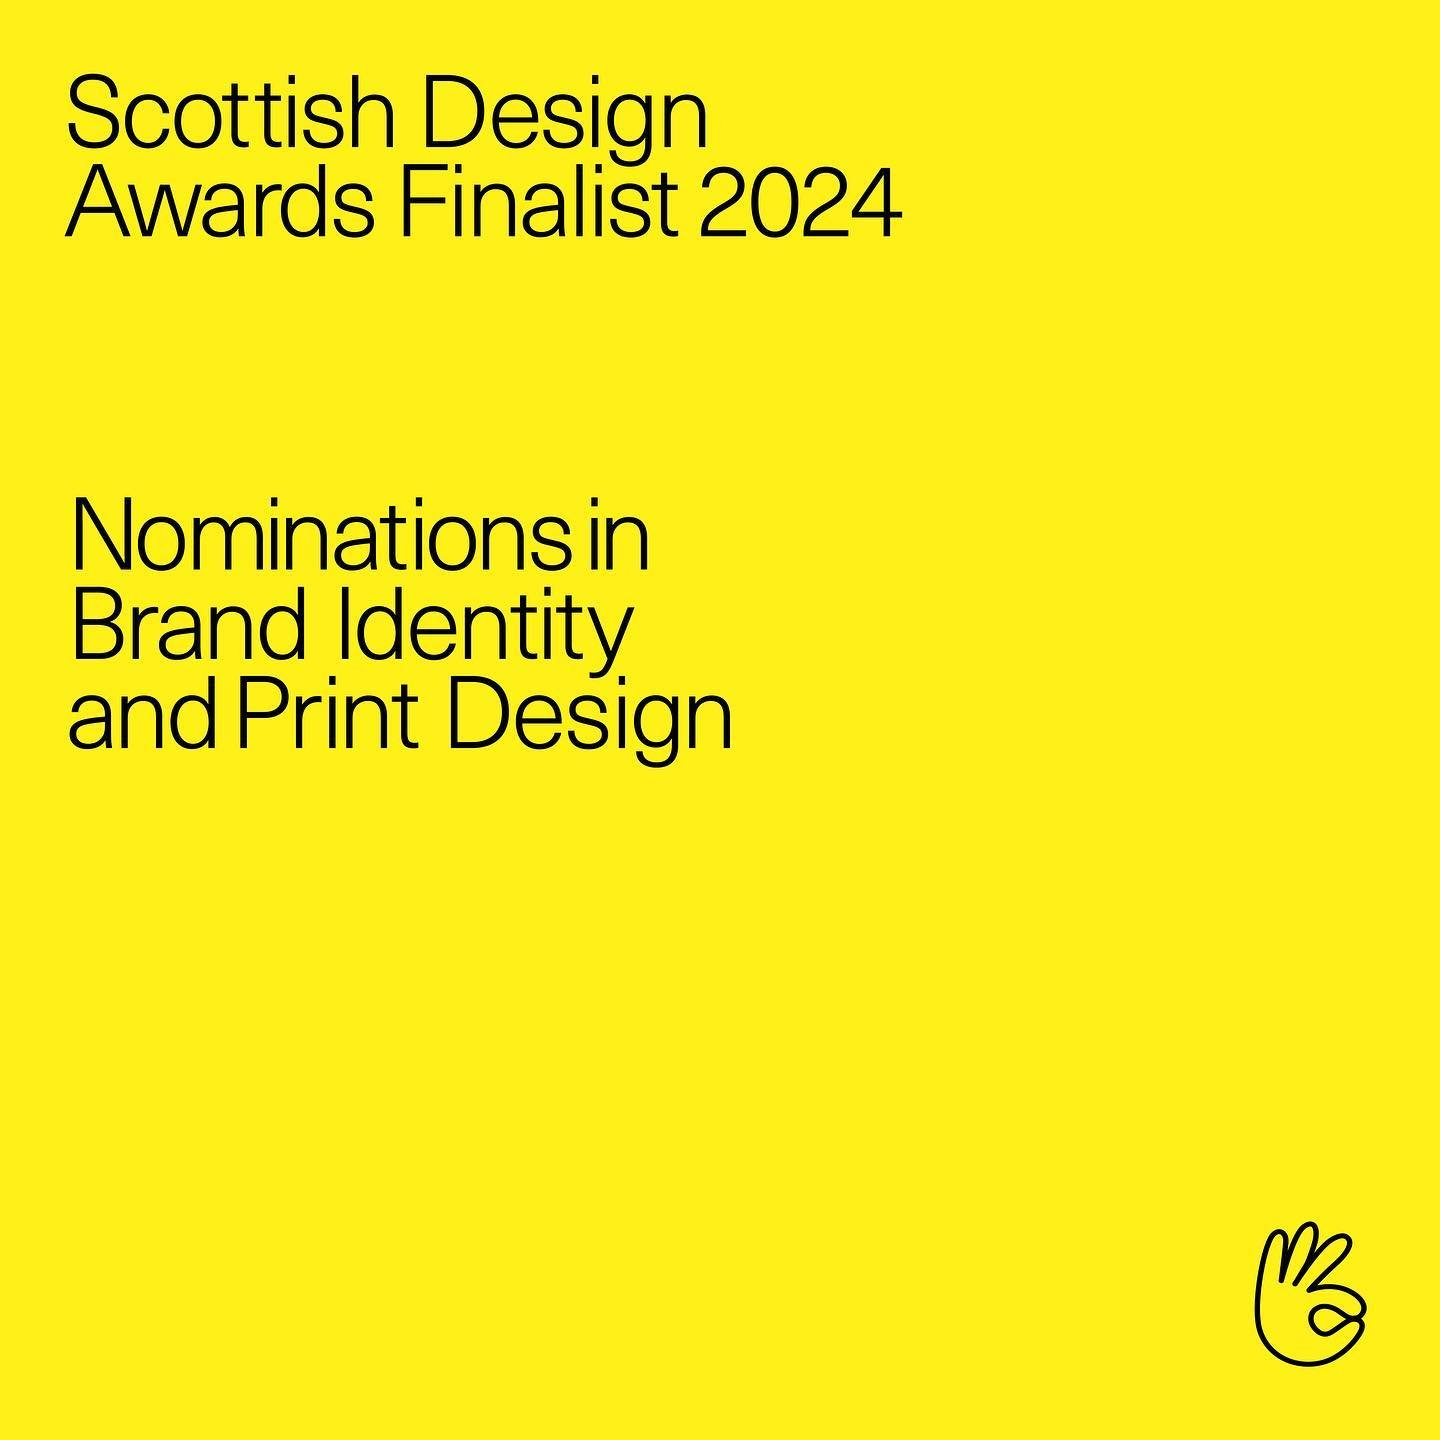 Pleased to be sharing the excellent news that Everything Will Be Fine has been nominated for two @scottishdesignawards this year. 

Japanese sushi canteen @ichigo.gla has been shortlisted in the Brand Identity category and our catalogue design for lo